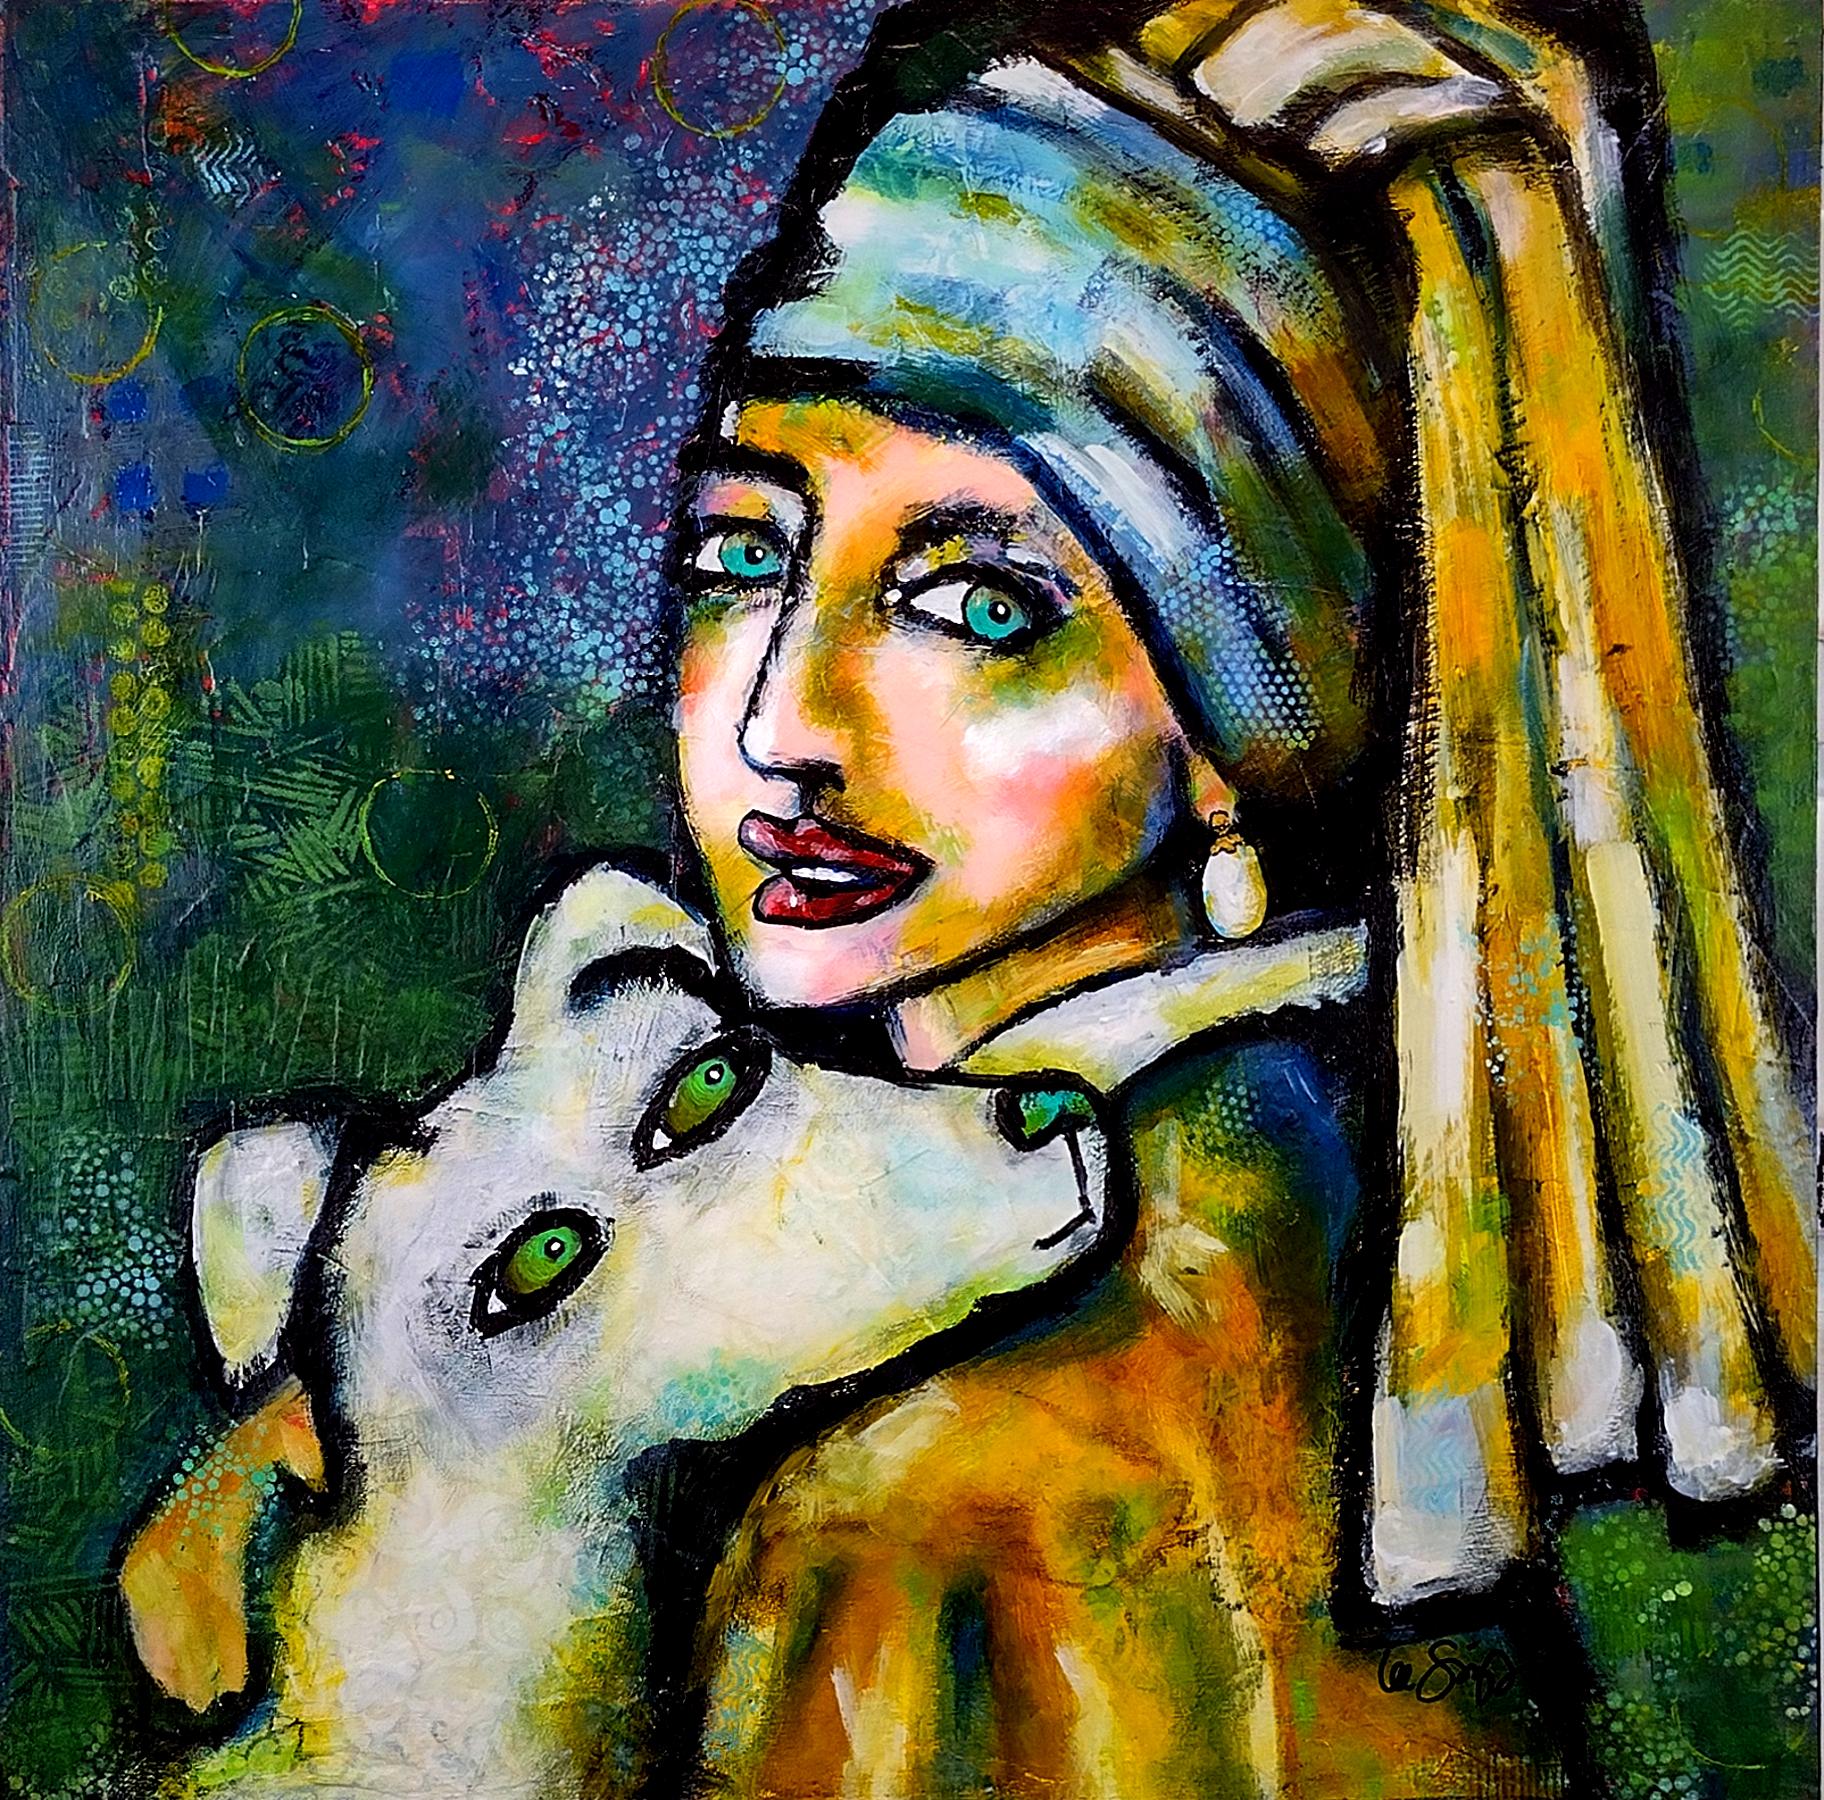 Girl With Pearl Earring and Her Dog, Original Painting - Mixed Media Art by Lee Smith